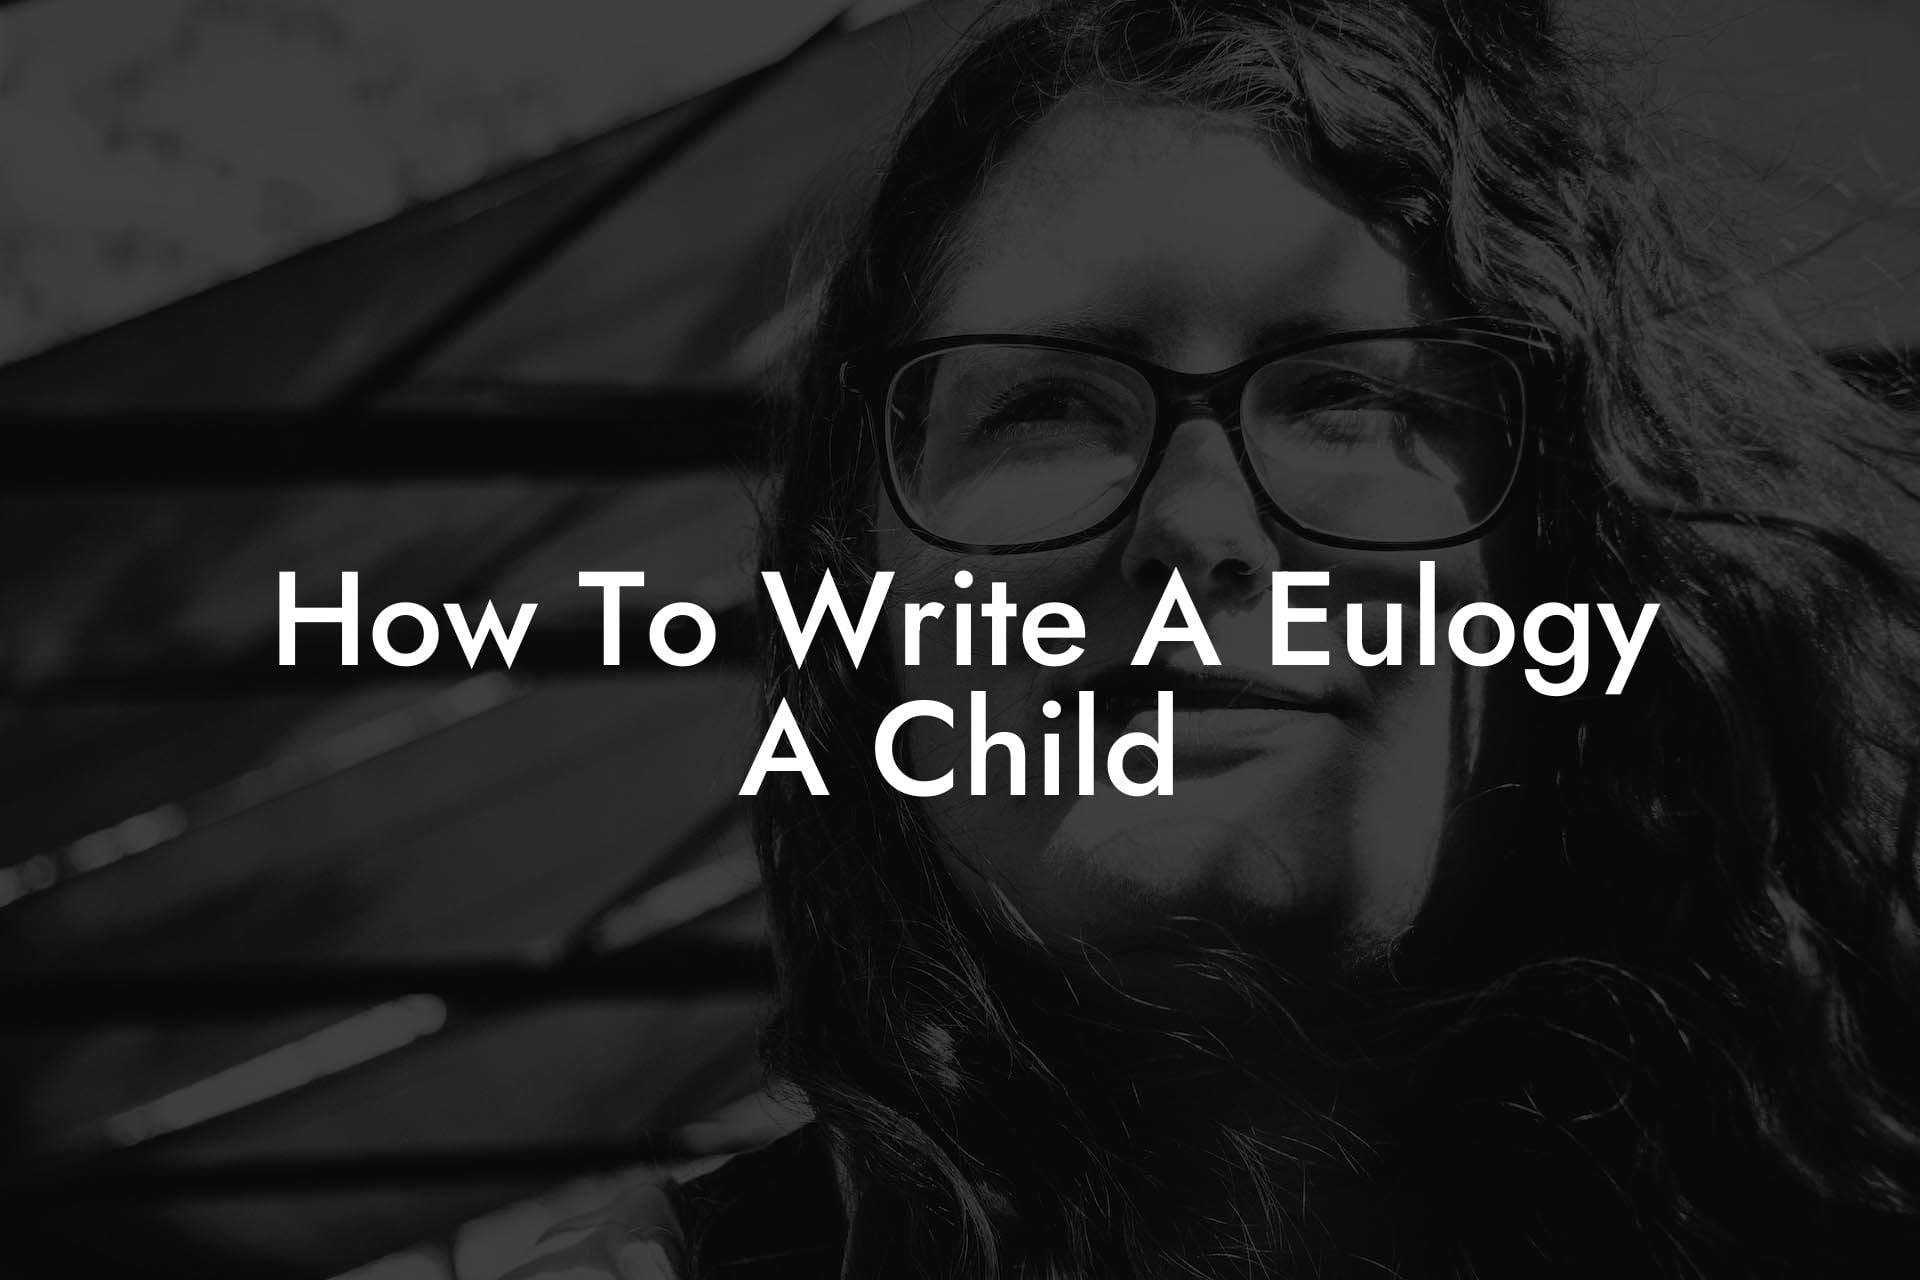 How To Write A Eulogy A Child